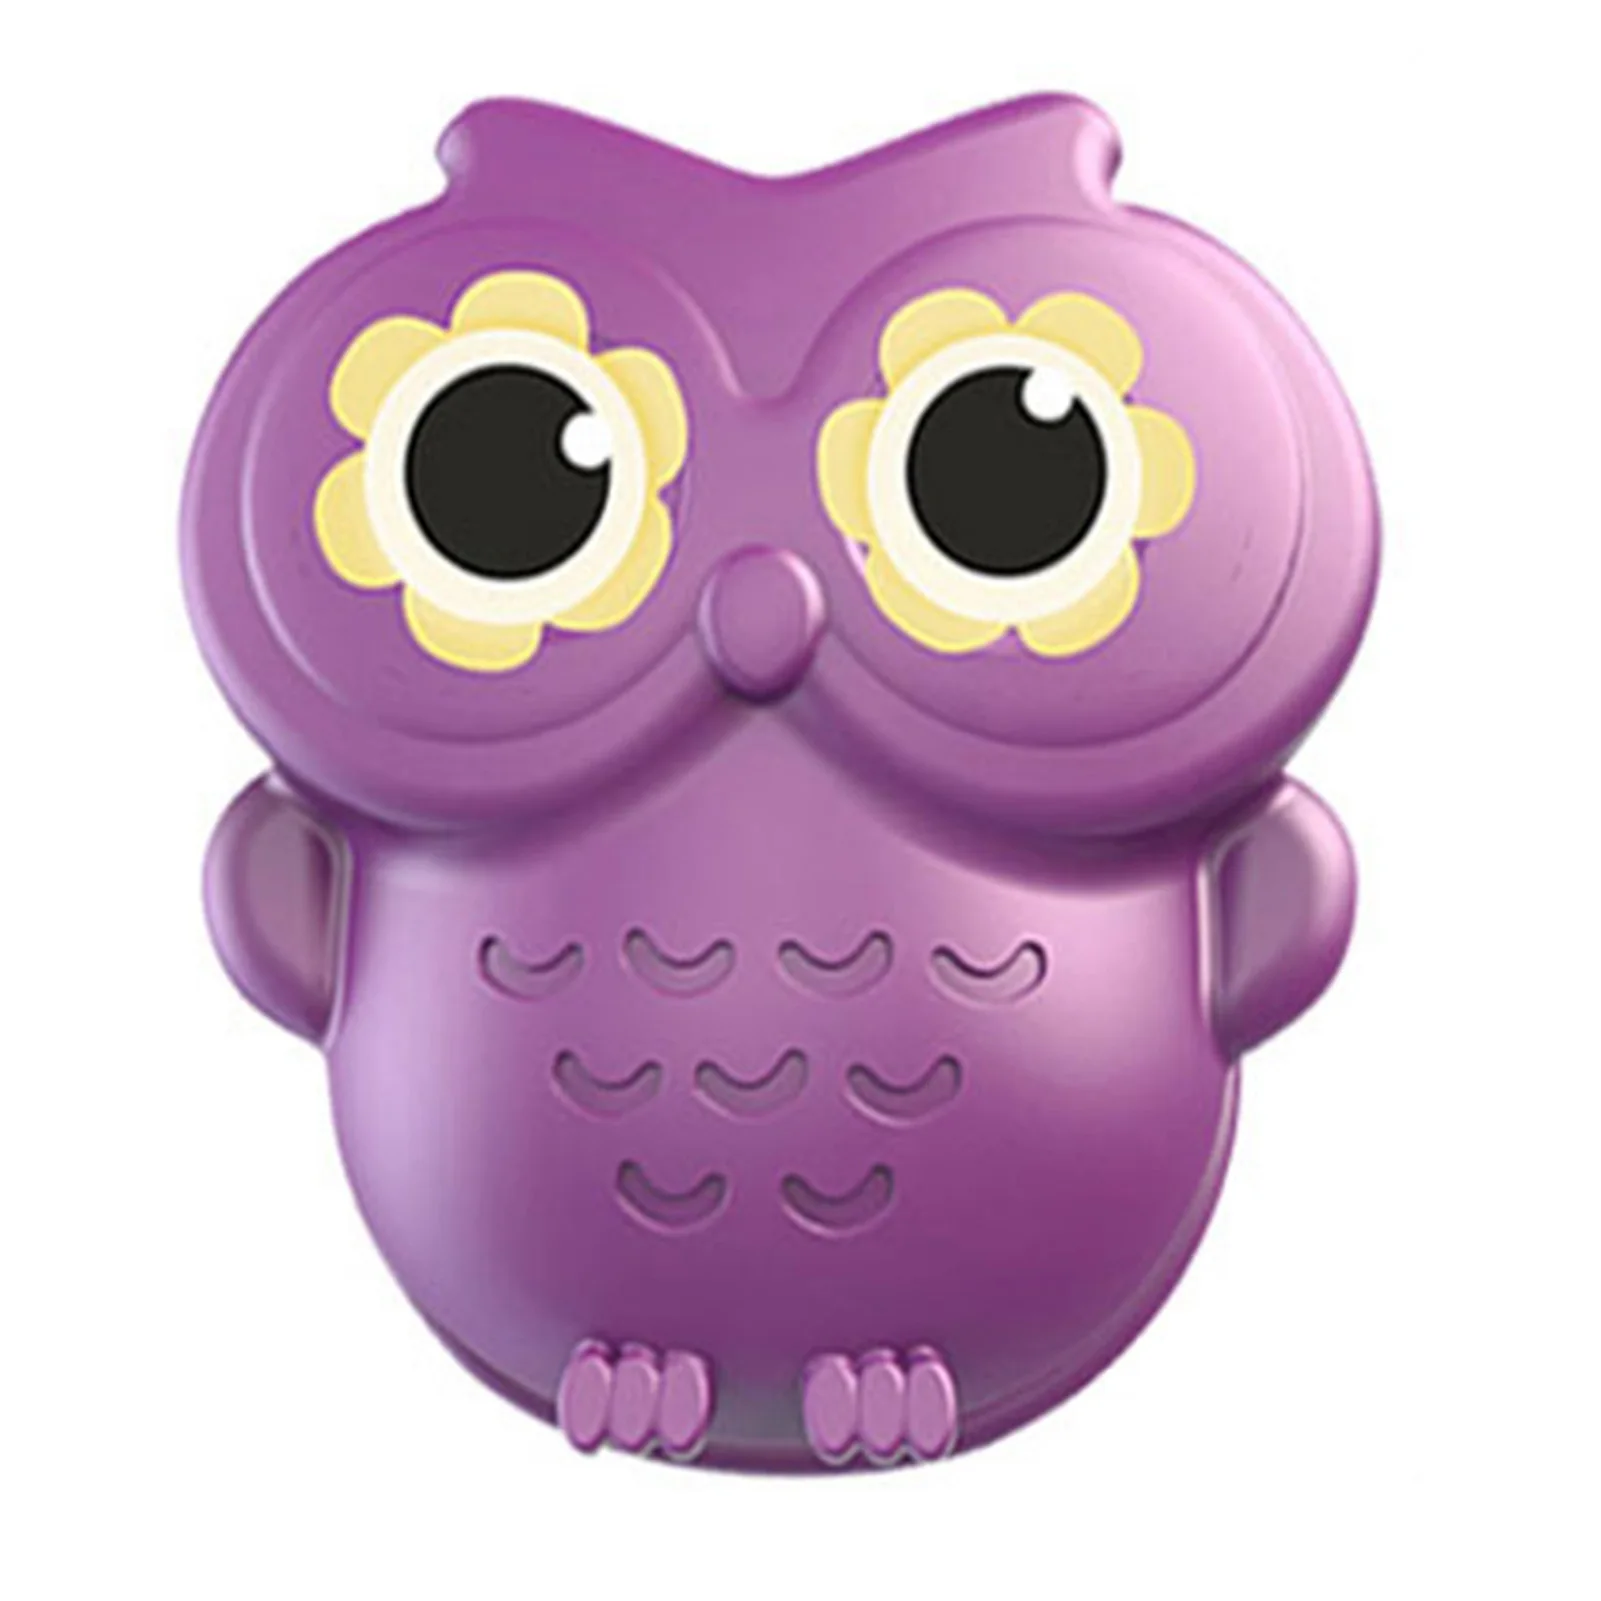 2 Pack Silicone Oven Mitts, Funny Mini Owl Gloves, Oven Mitts Heat  Resistant, Kitchen Mitt Potholders for Cooking and BBQ, Easy Clean(Purple)